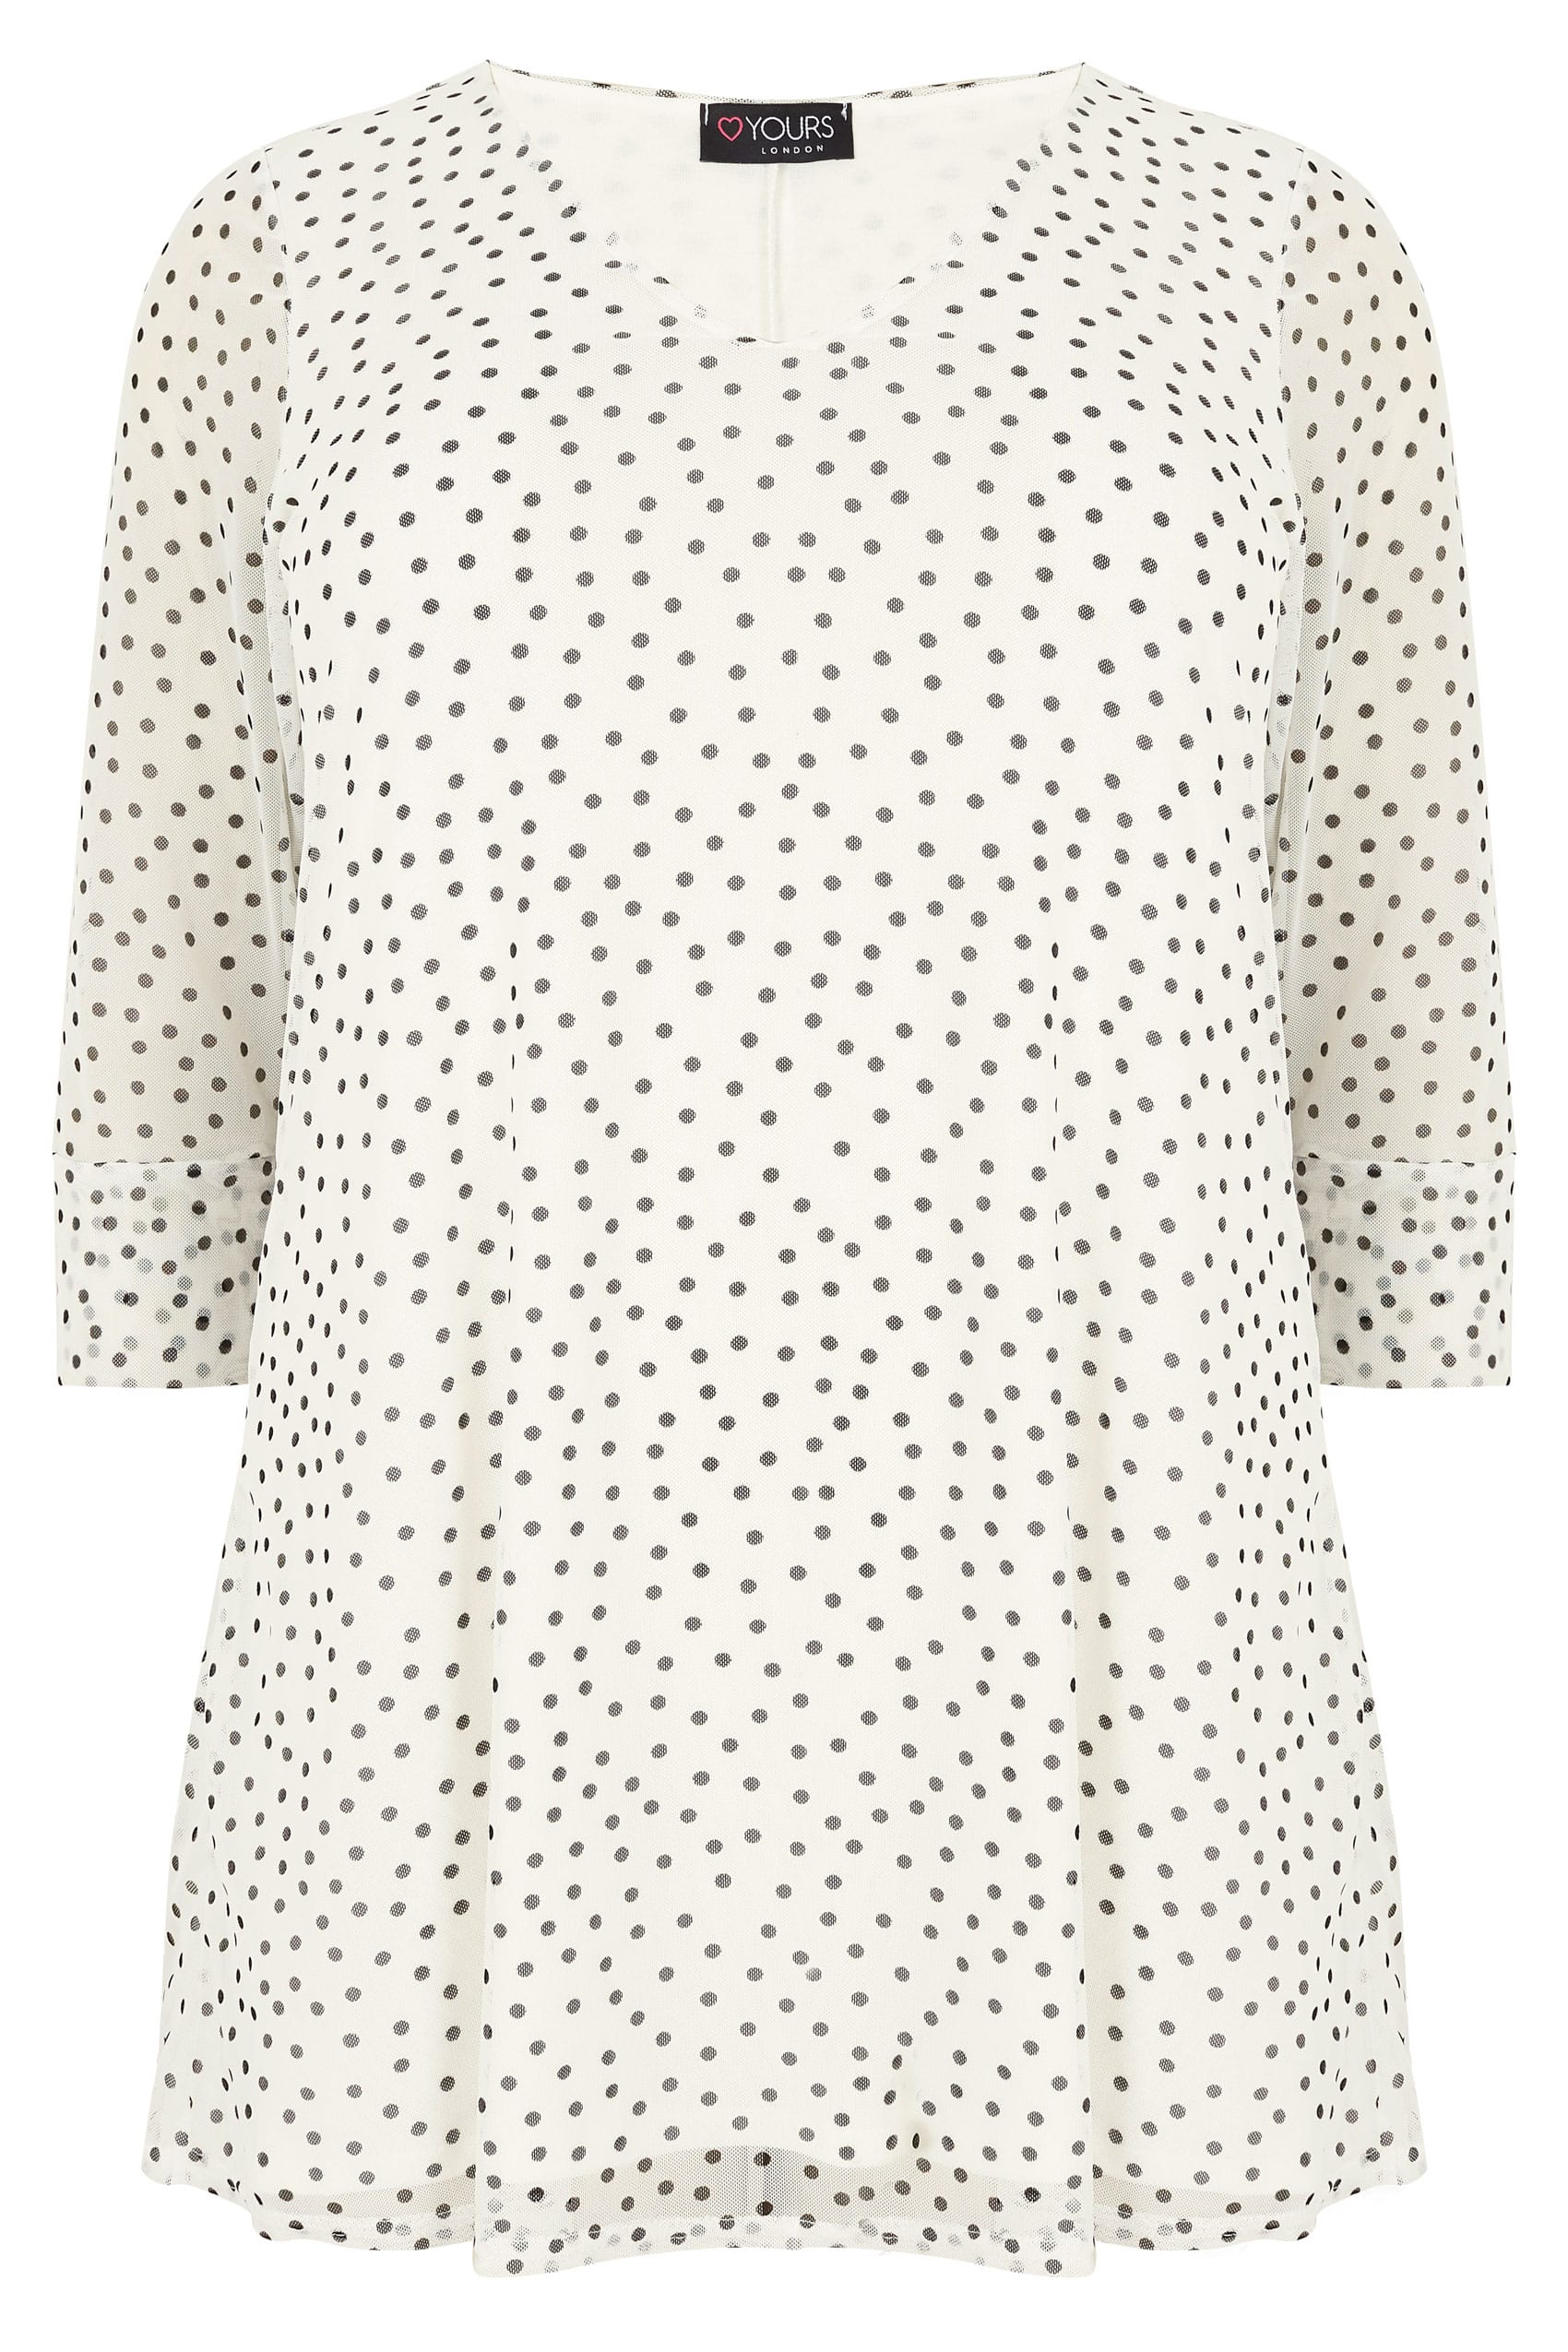 YOURS LONDON Ivory & Black Polka Dot Mesh Top, plus size 16 to 36